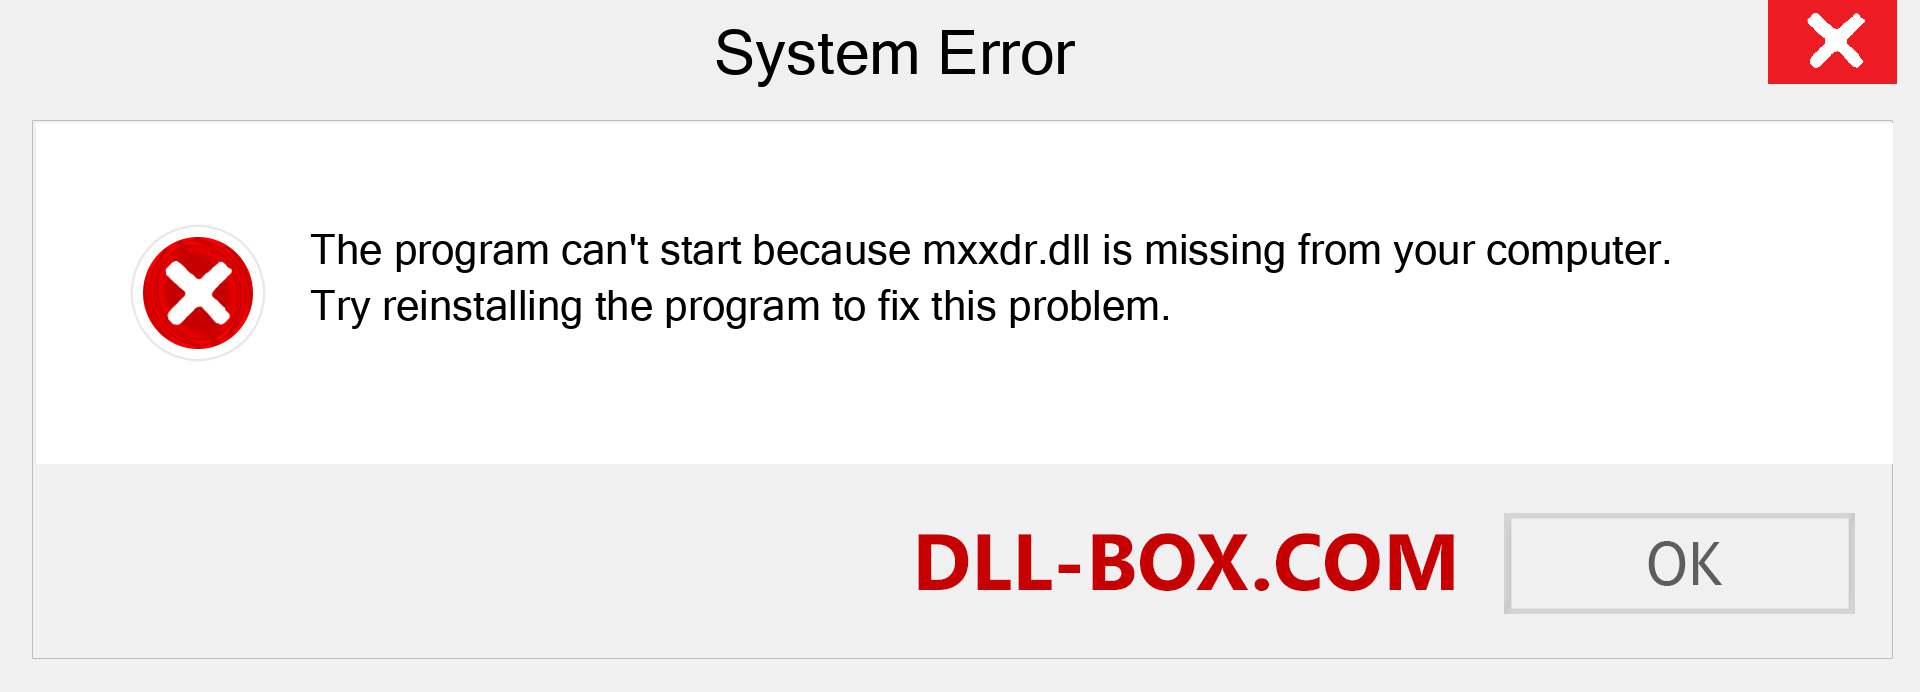  mxxdr.dll file is missing?. Download for Windows 7, 8, 10 - Fix  mxxdr dll Missing Error on Windows, photos, images